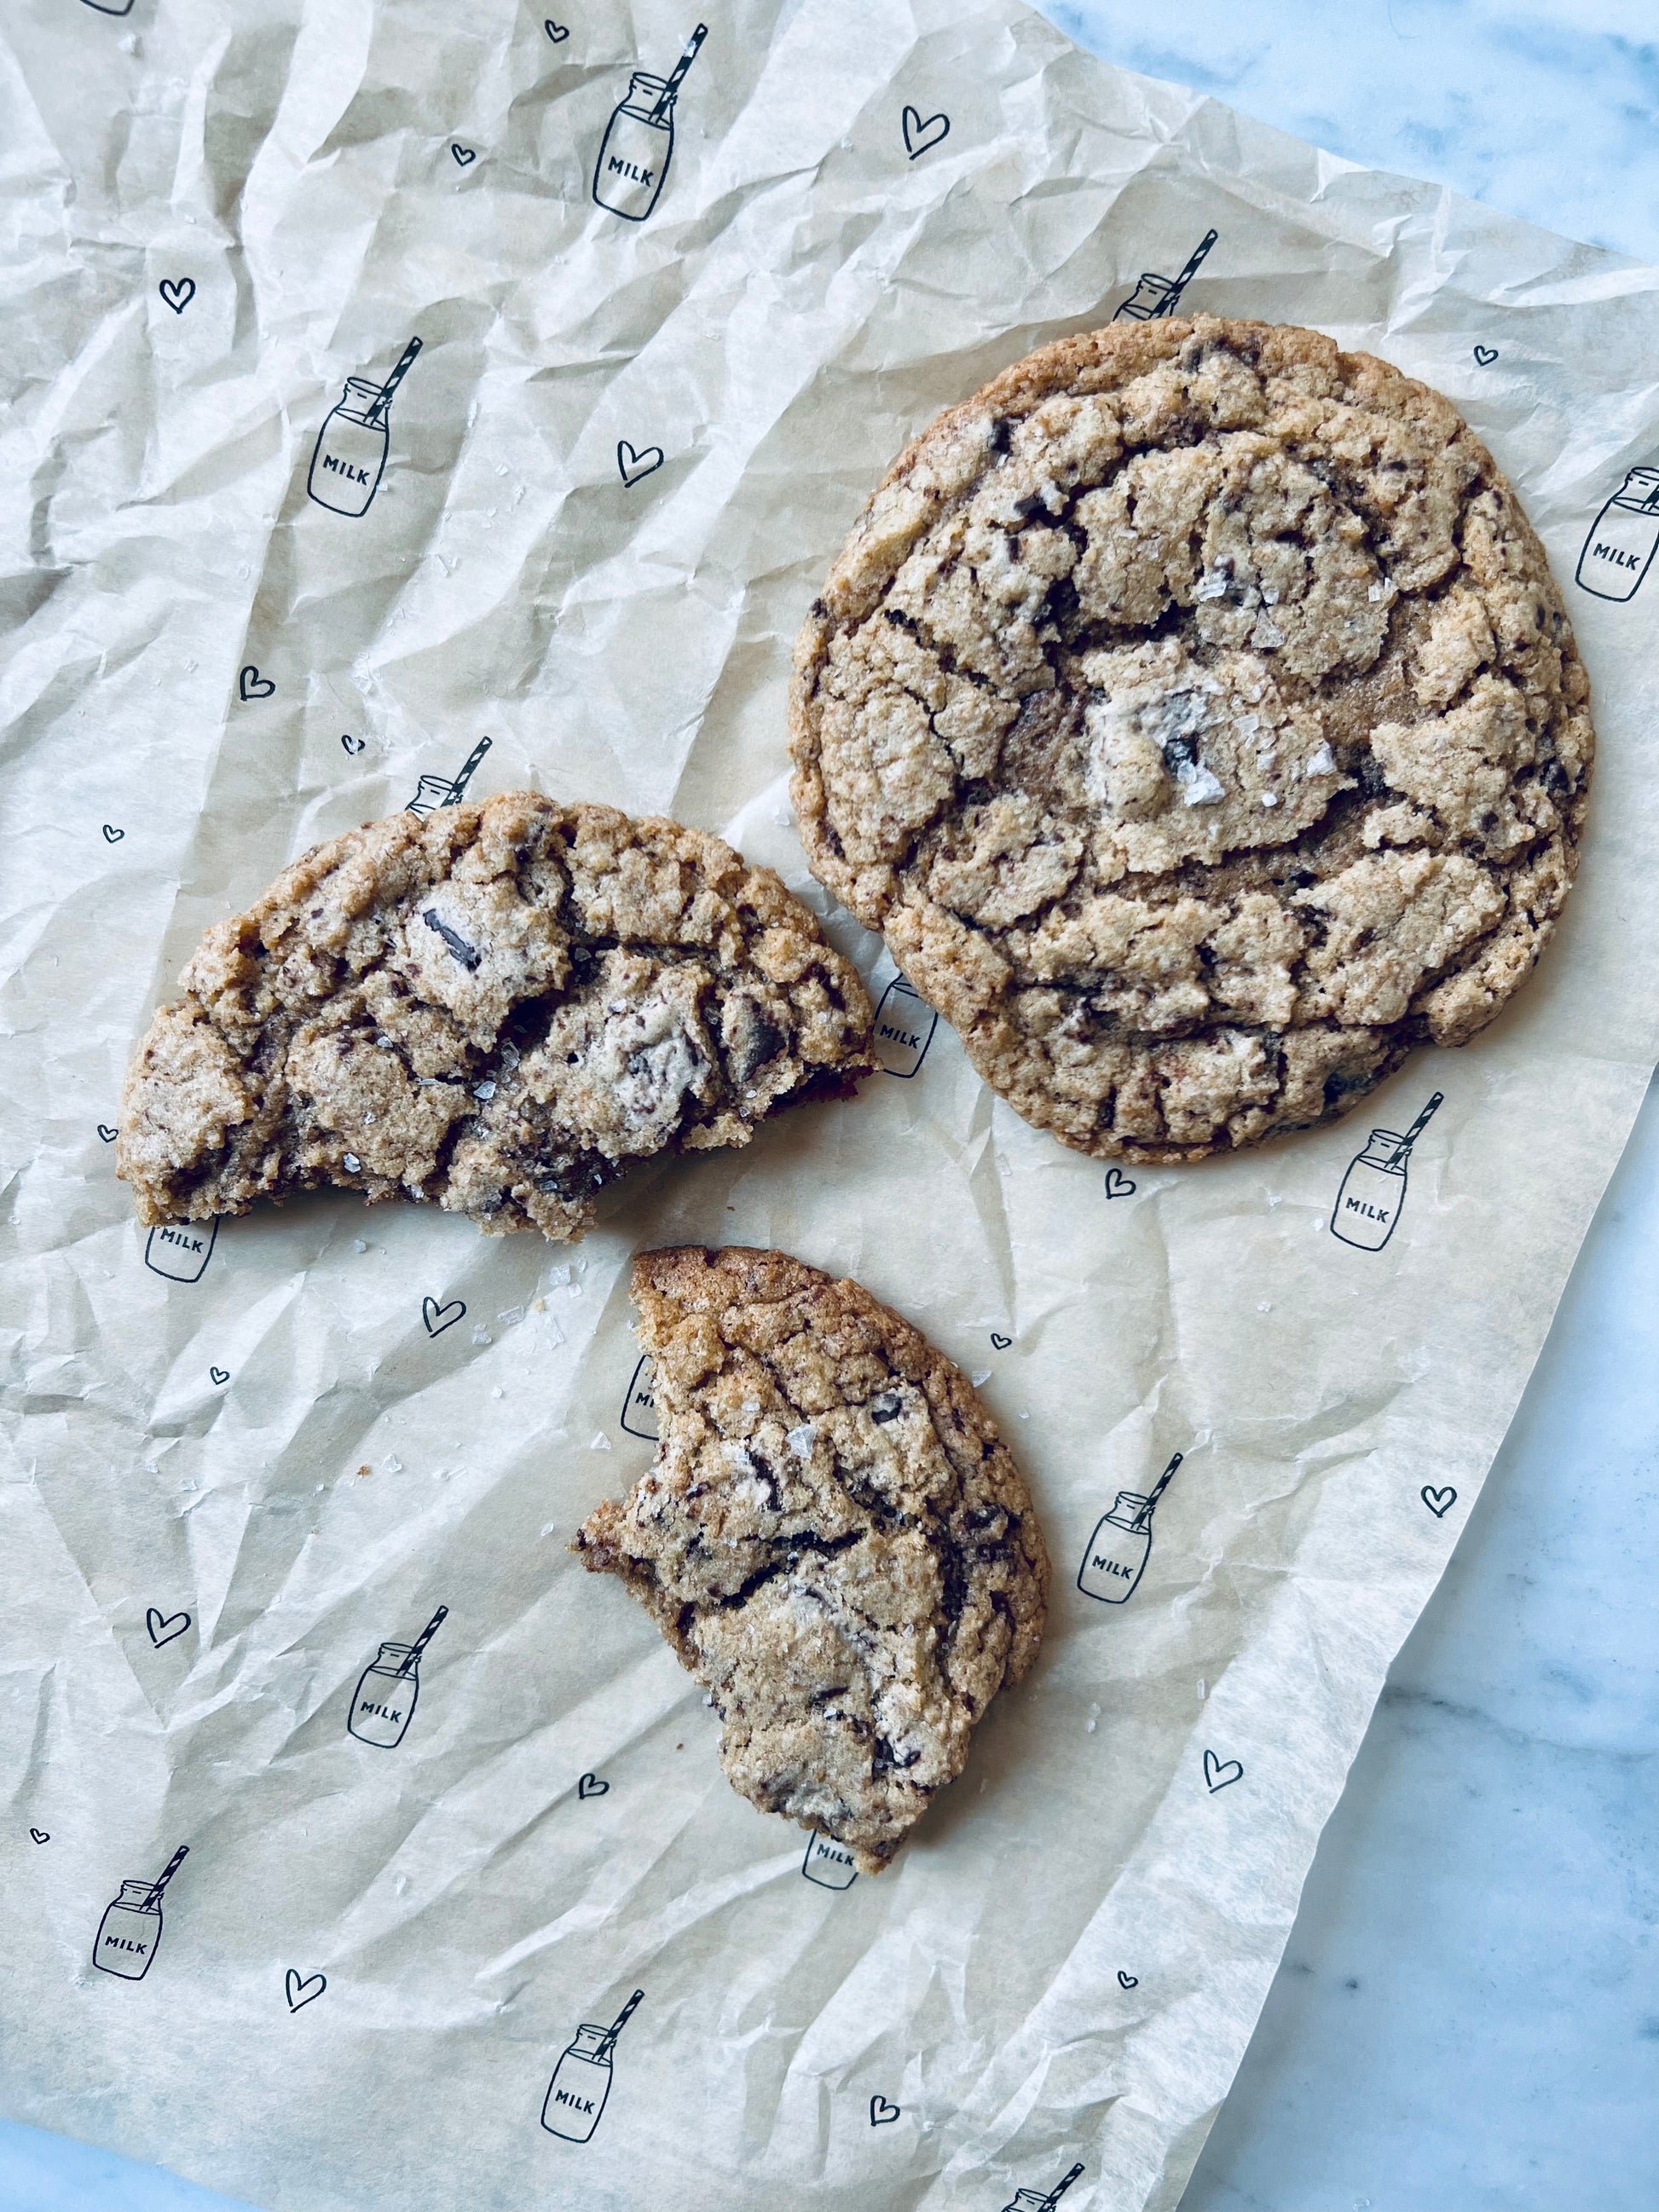 How to Bake Cookies With Wax Paper